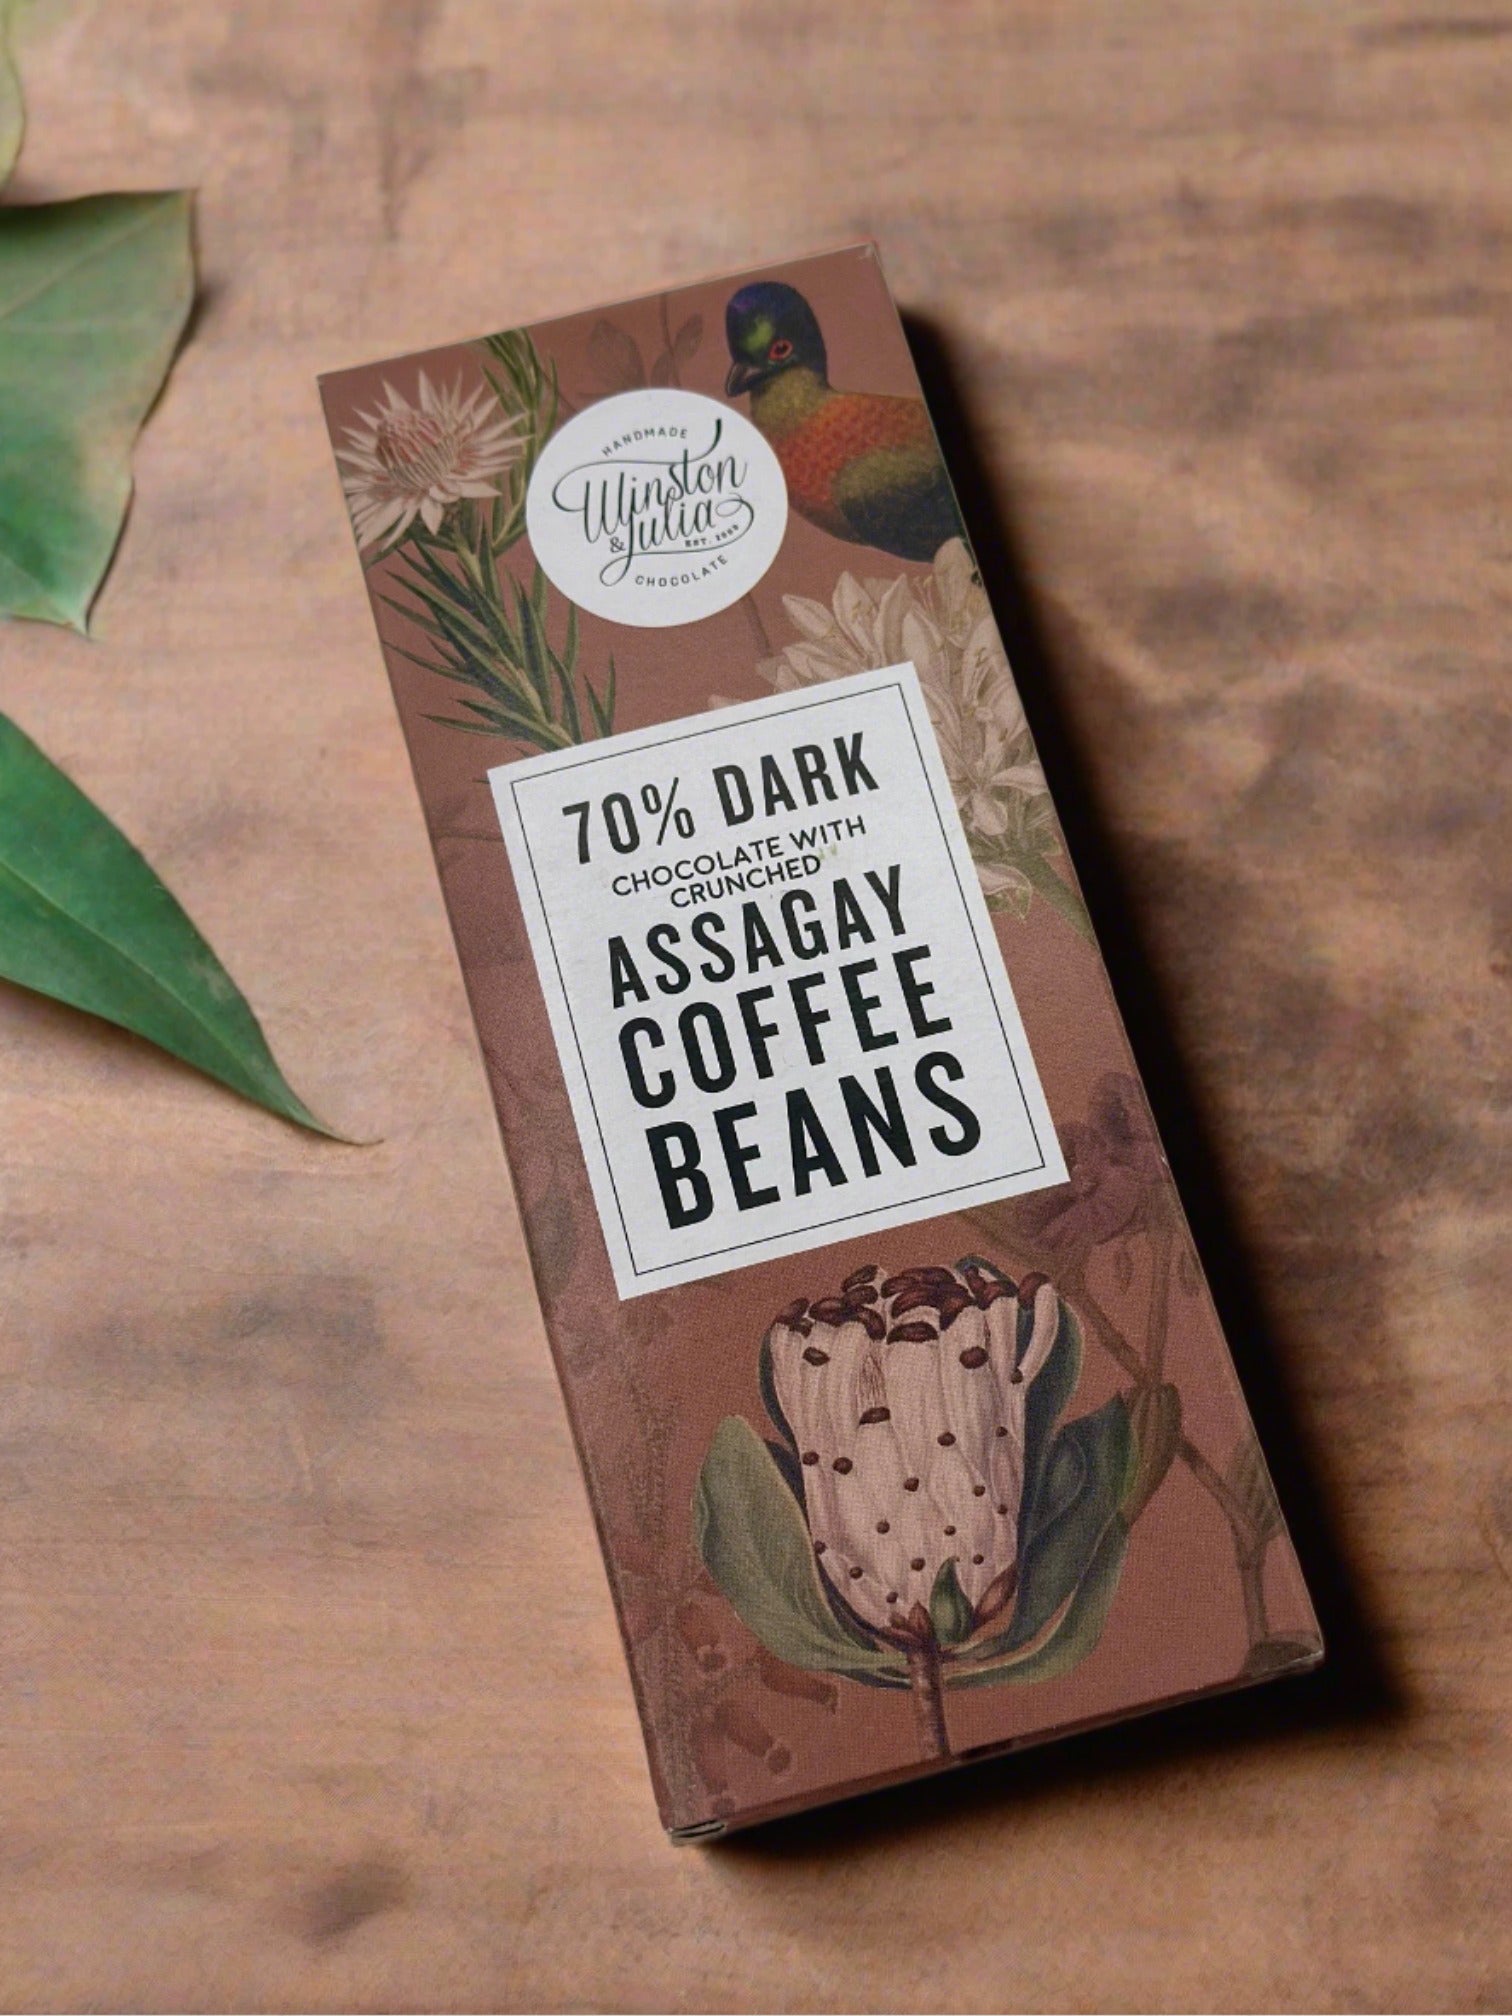 Dark Chocolate with crunched Assagay Coffee Beans - Impala Online